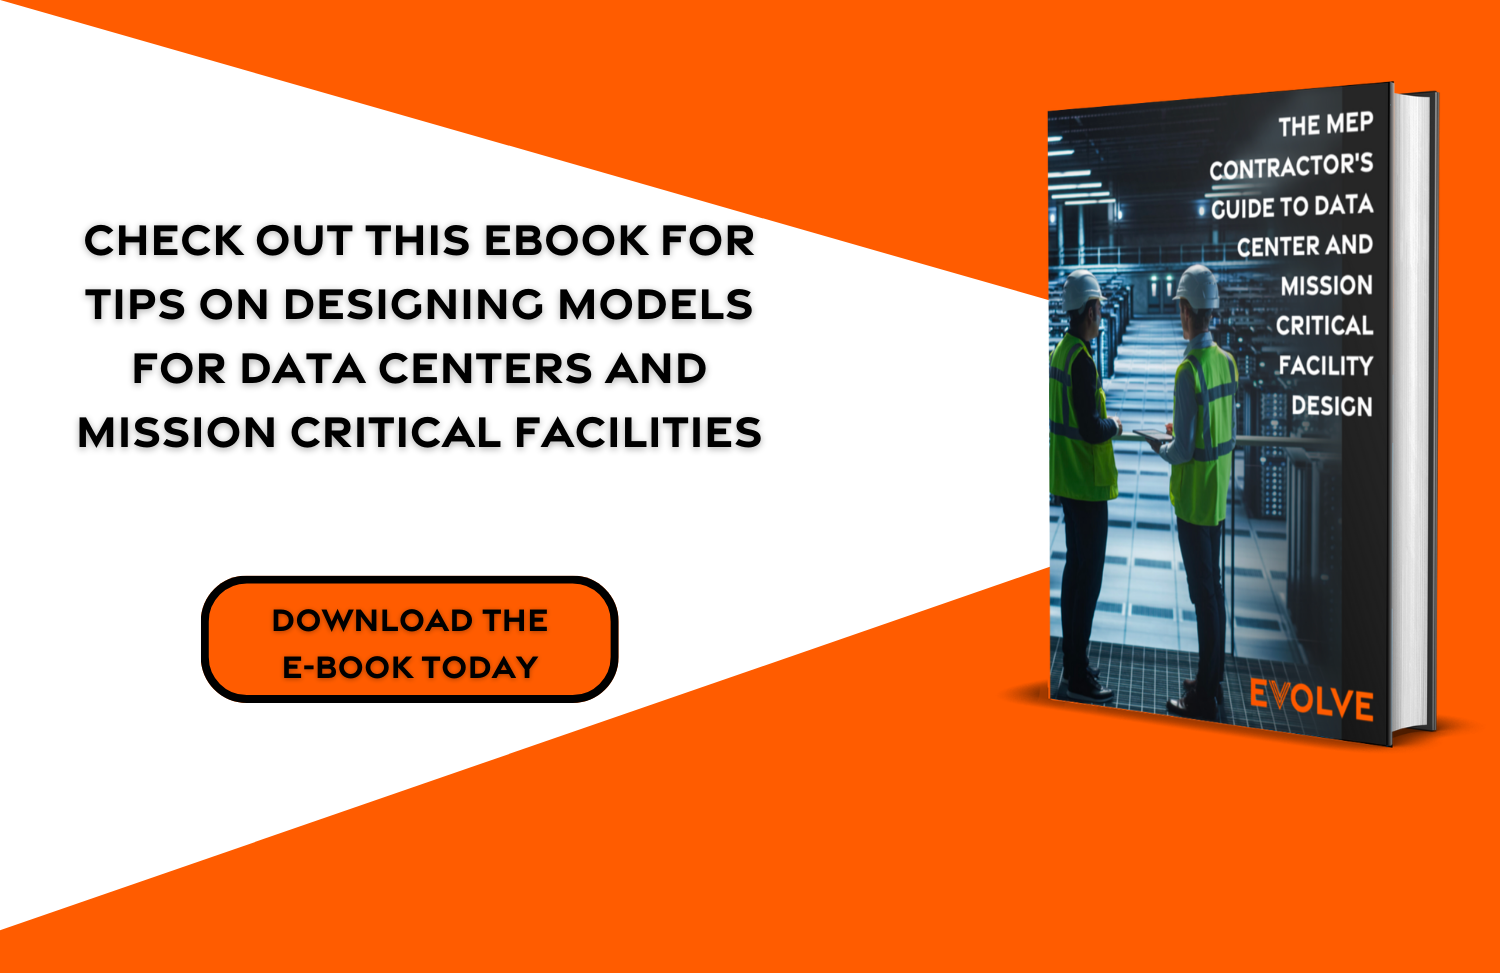 MEP Contractors Guide to Data Center and Mission Critical Facility Design 